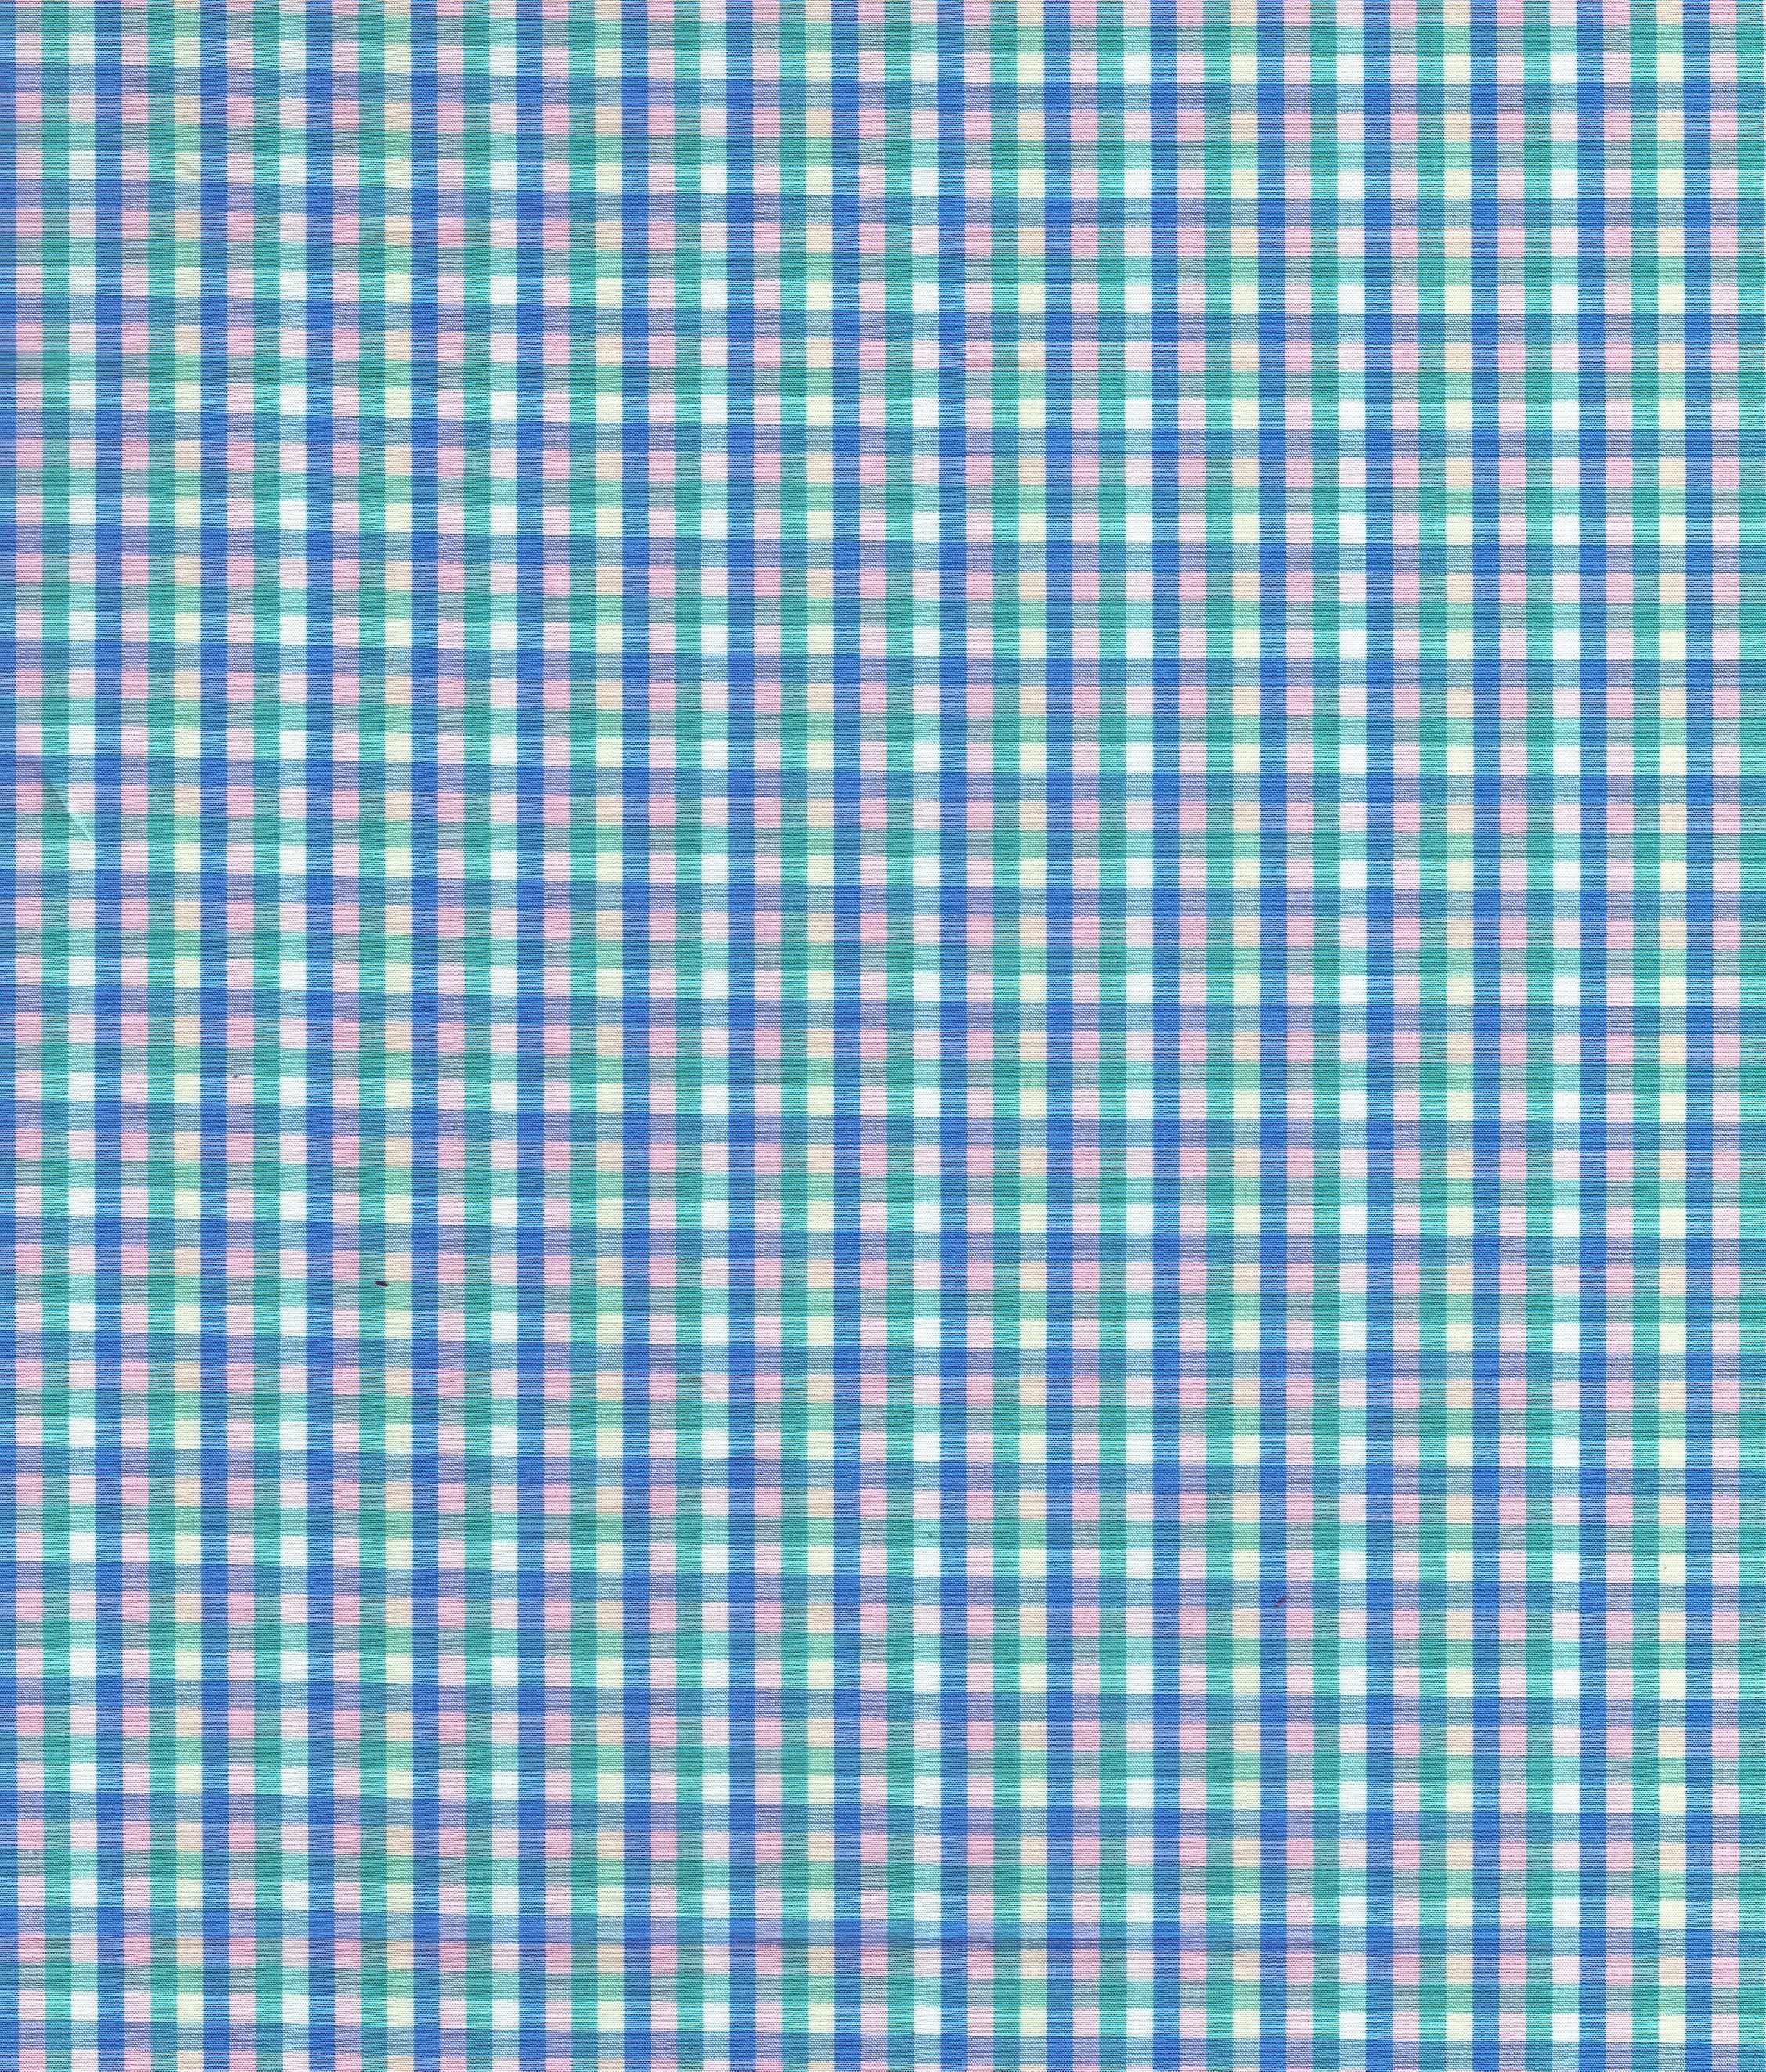 View GINGHAM MULTI COLORED